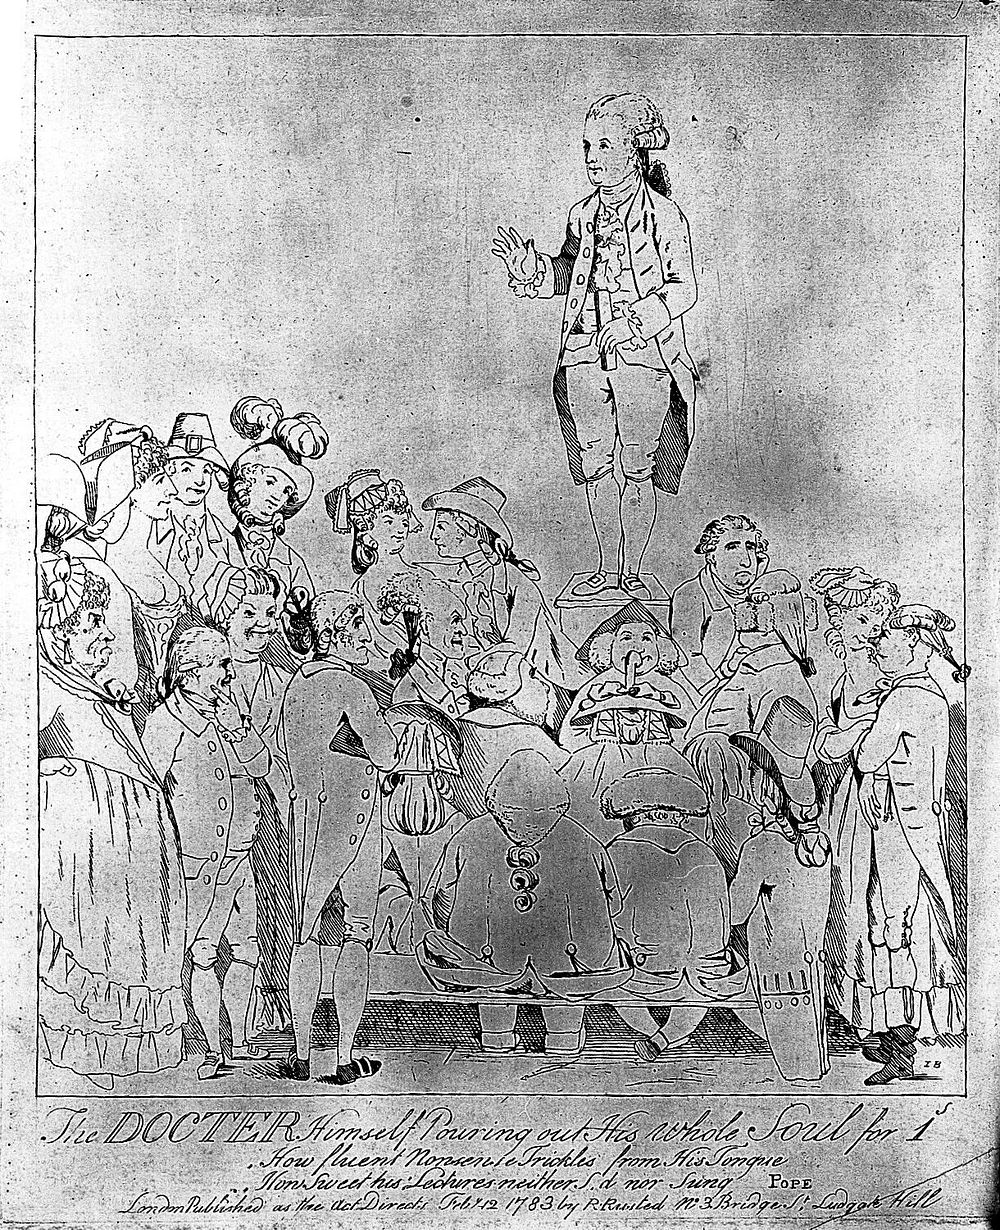 James Graham lecturing from a podium, to a crowd of ladies and gentlemen. Etching by J. Boyne, 1783.